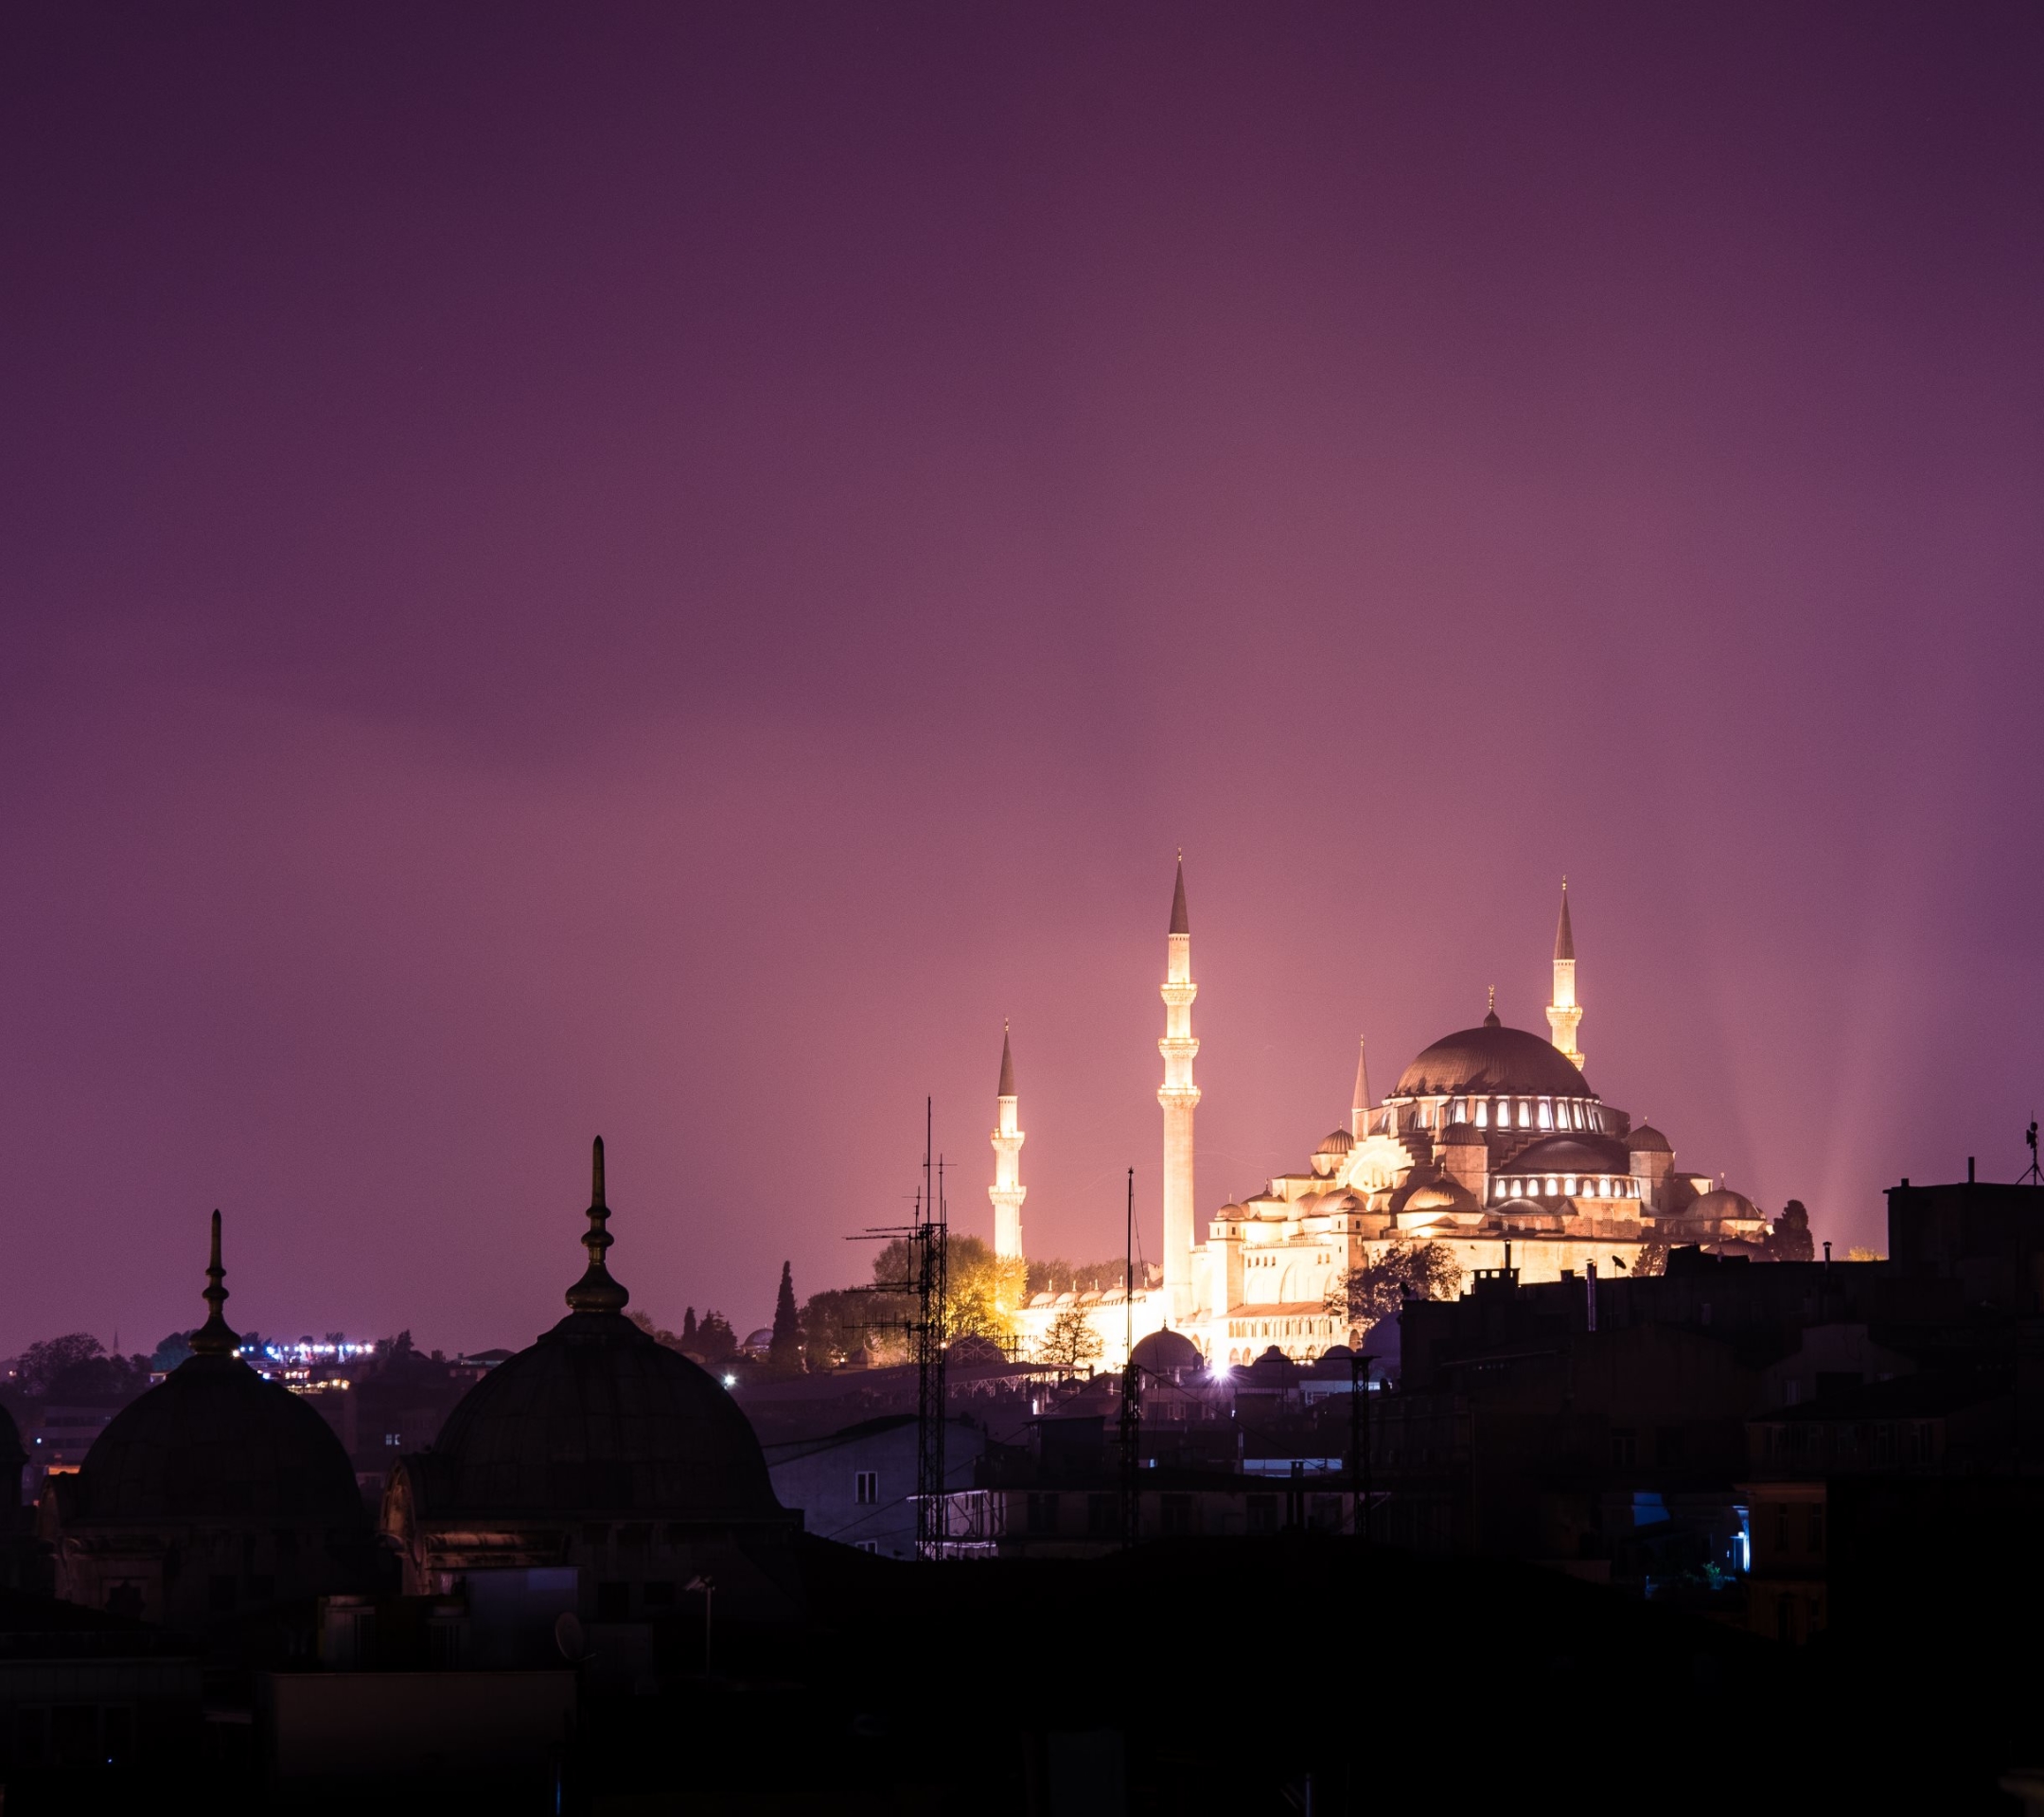 islam, religious, suleymaniye mosque, religion, night, mosque, mosques cellphone